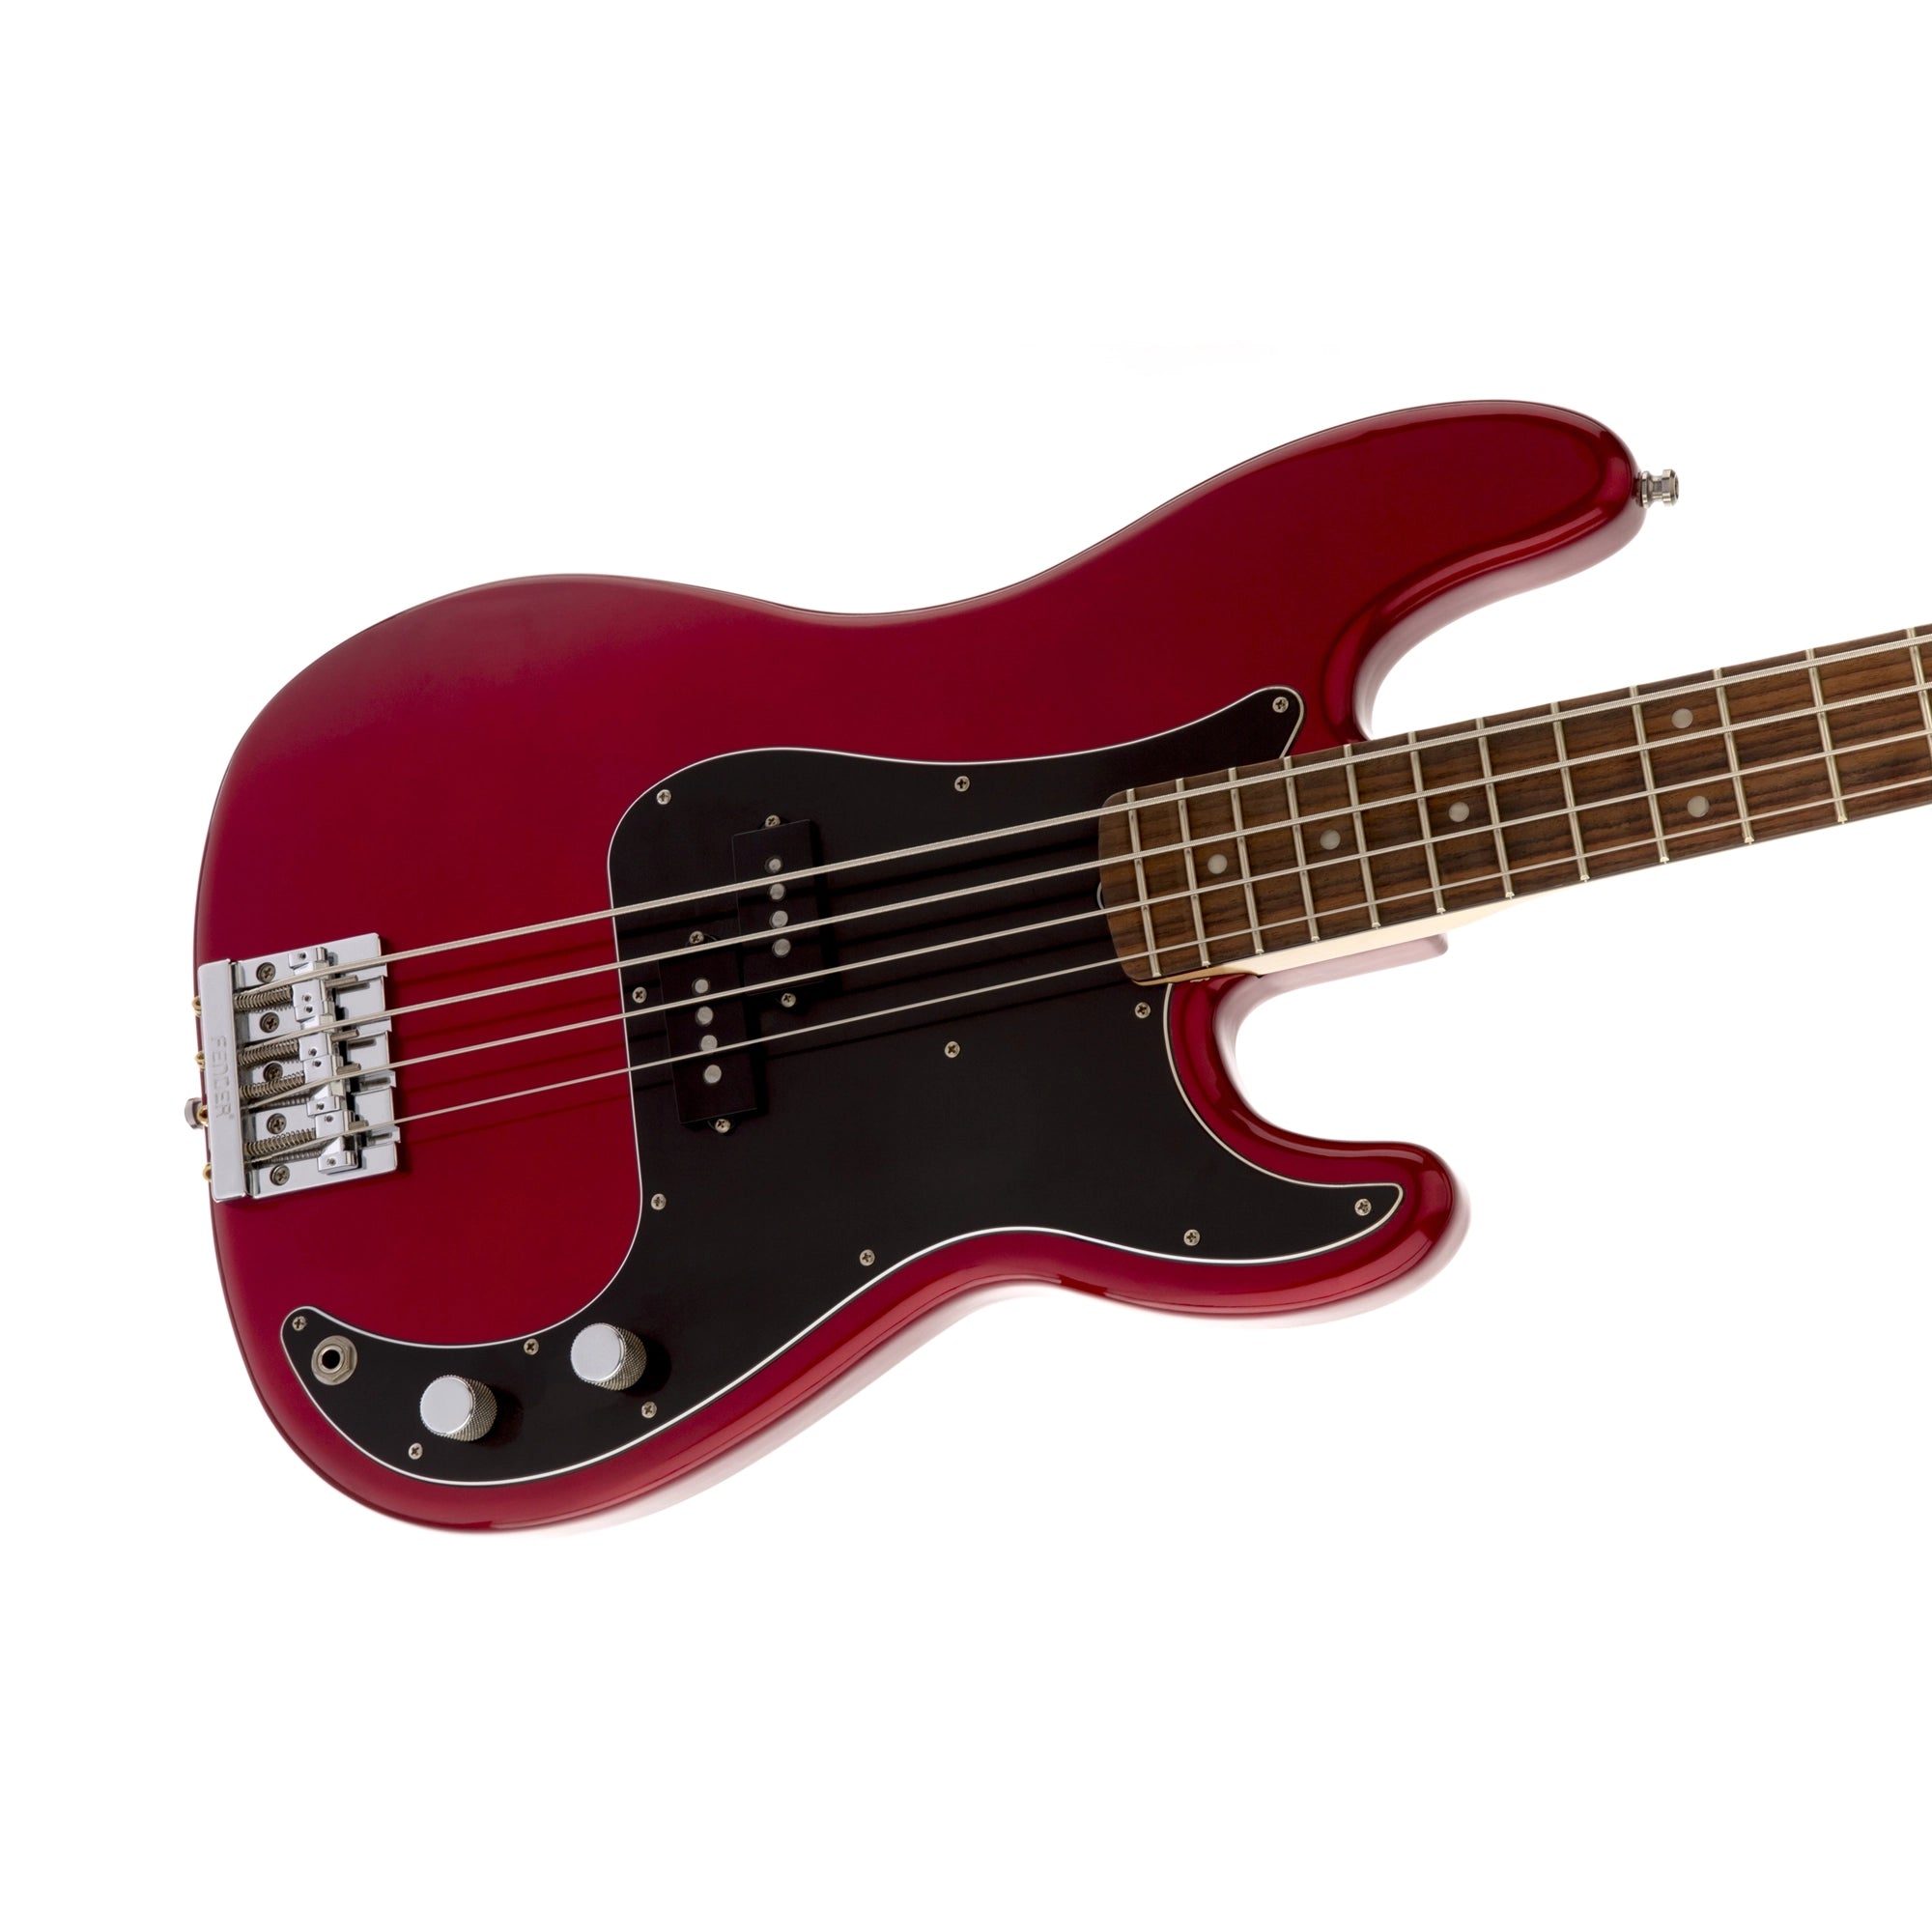 Fender Nate Mendel 4-String Precision Bass - Road Worn Candy Apple Red